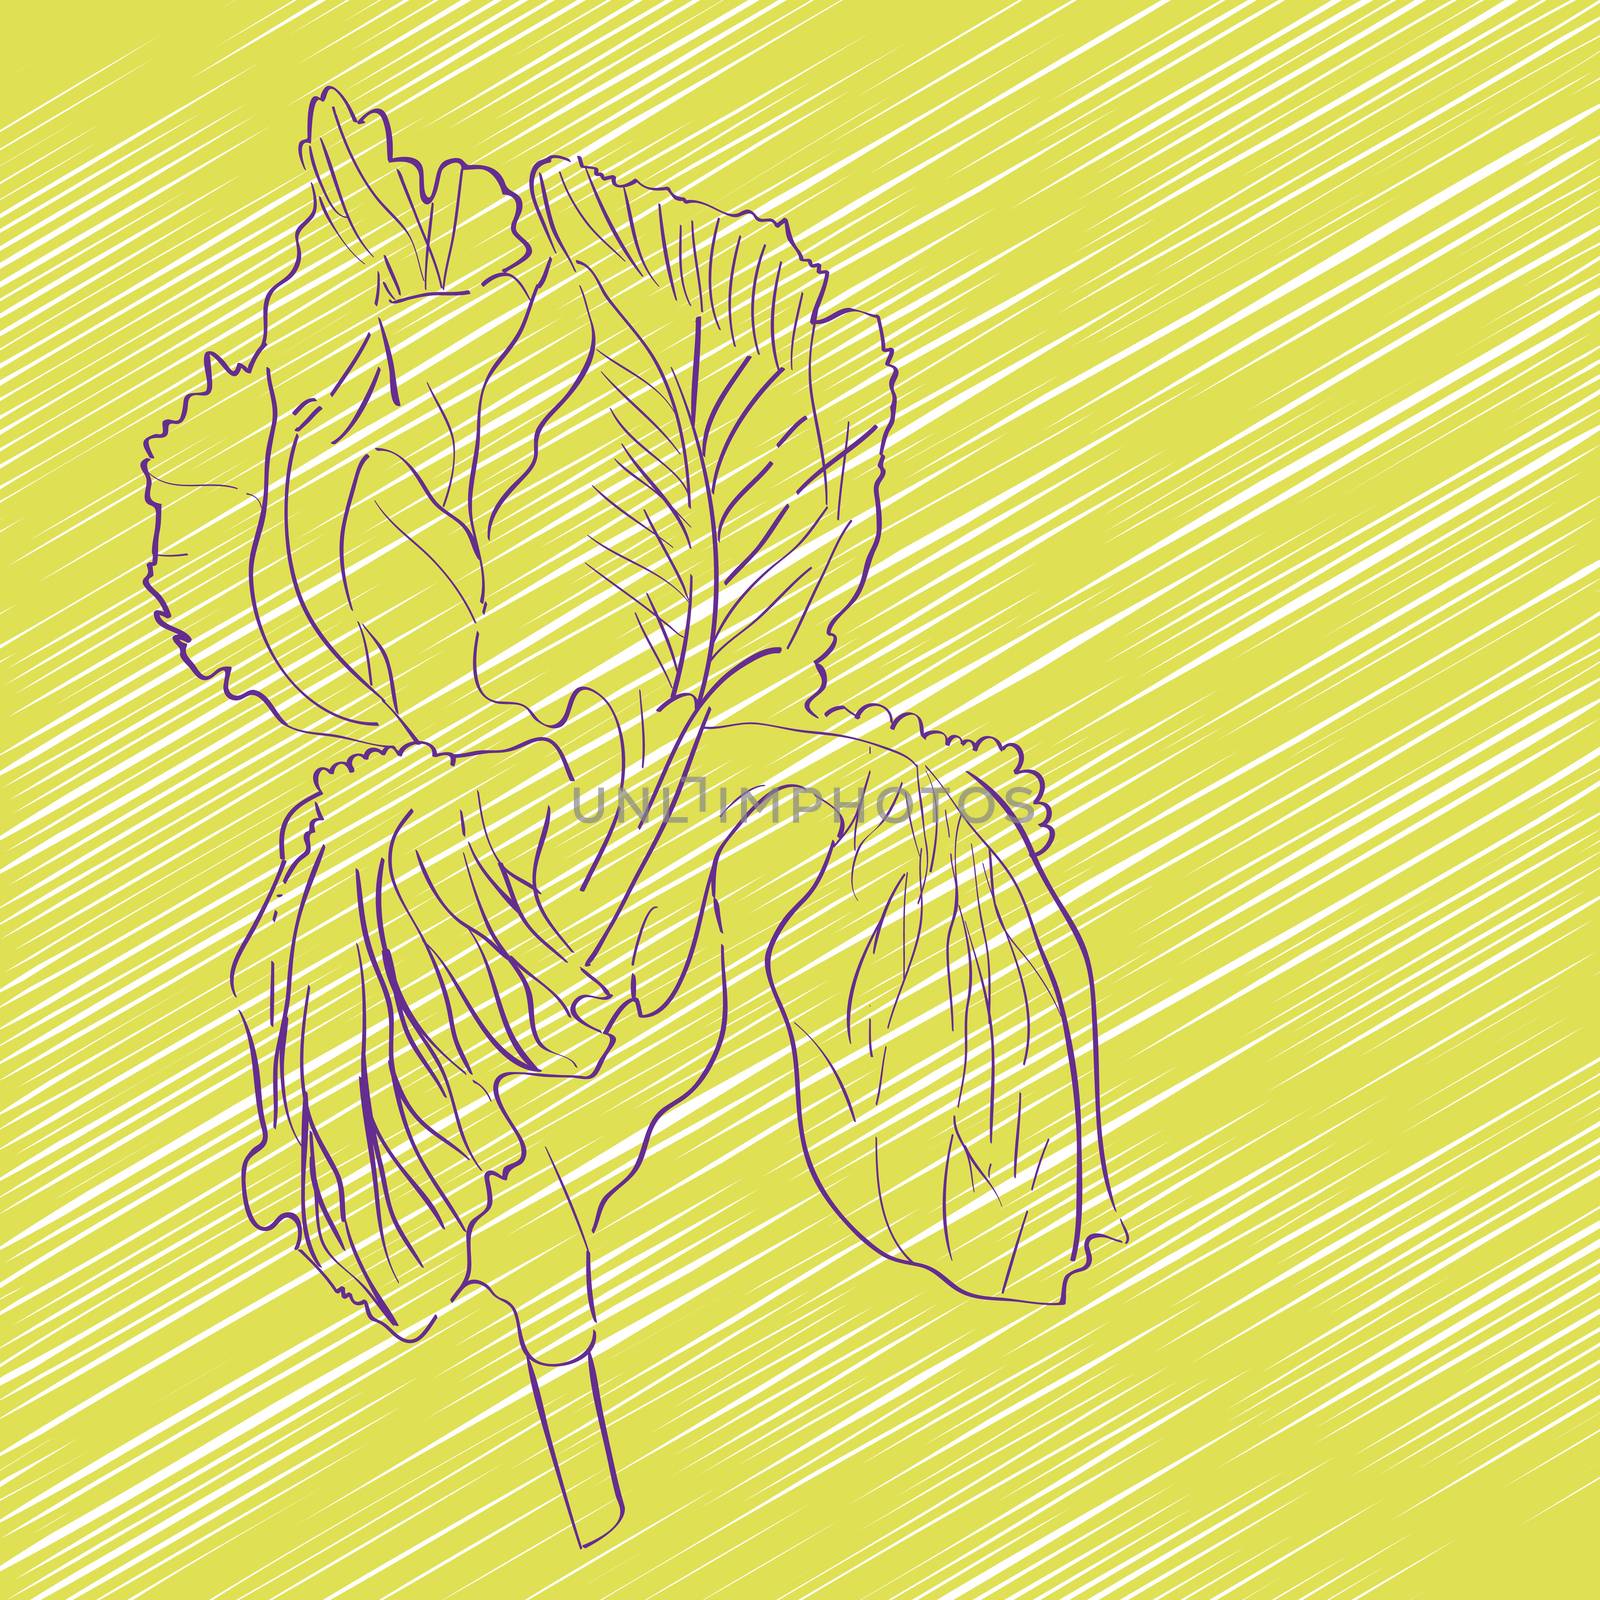 Hand drawn sketch of an iris flower over a dark yellow background, greeting card